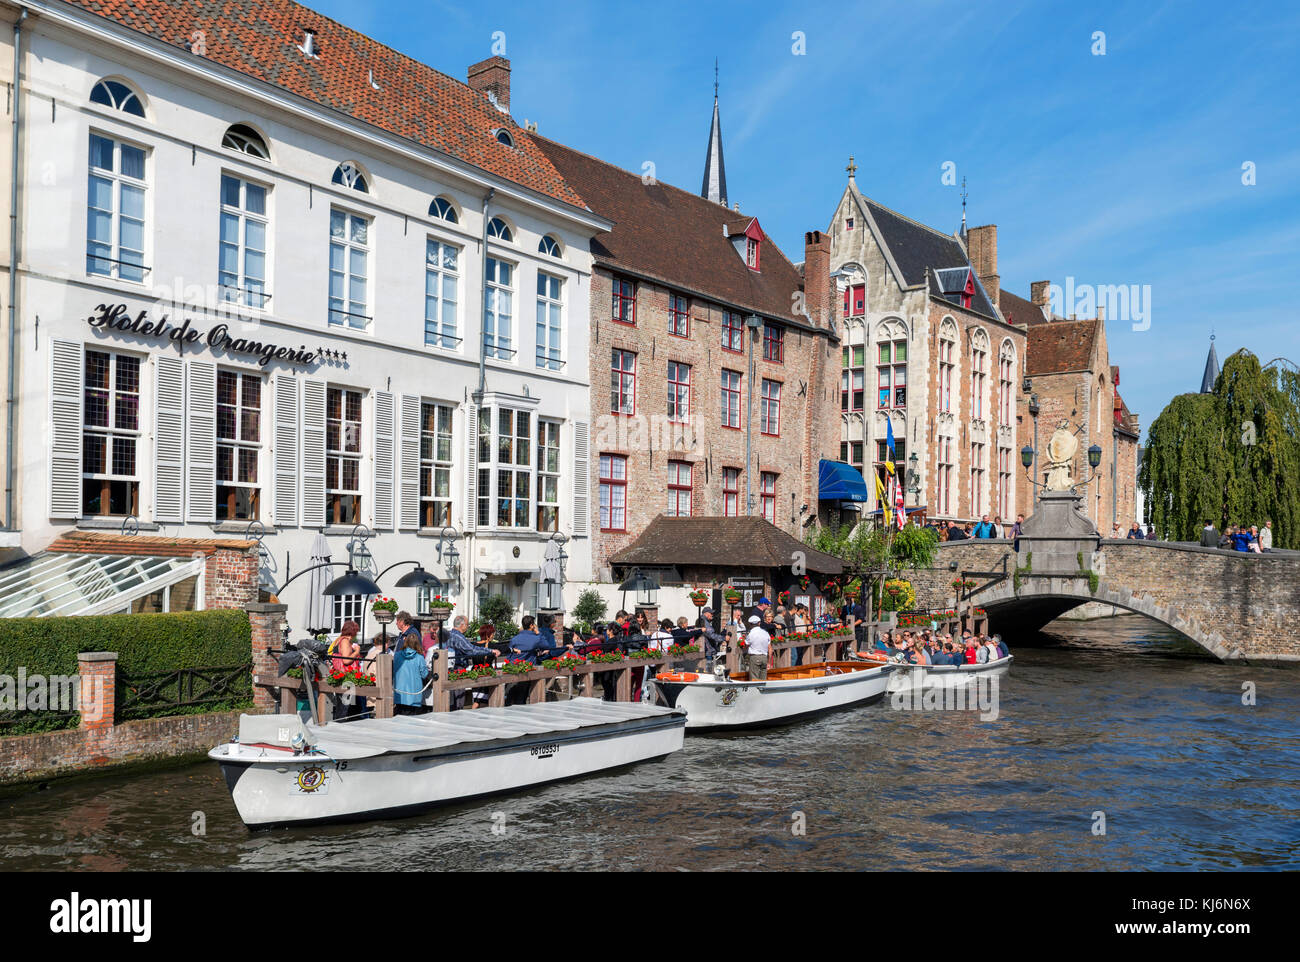 Boat tours on the Djiver Canal outside the Hotel de Orangerie, Bruges (Brugge), Belgium. Stock Photo